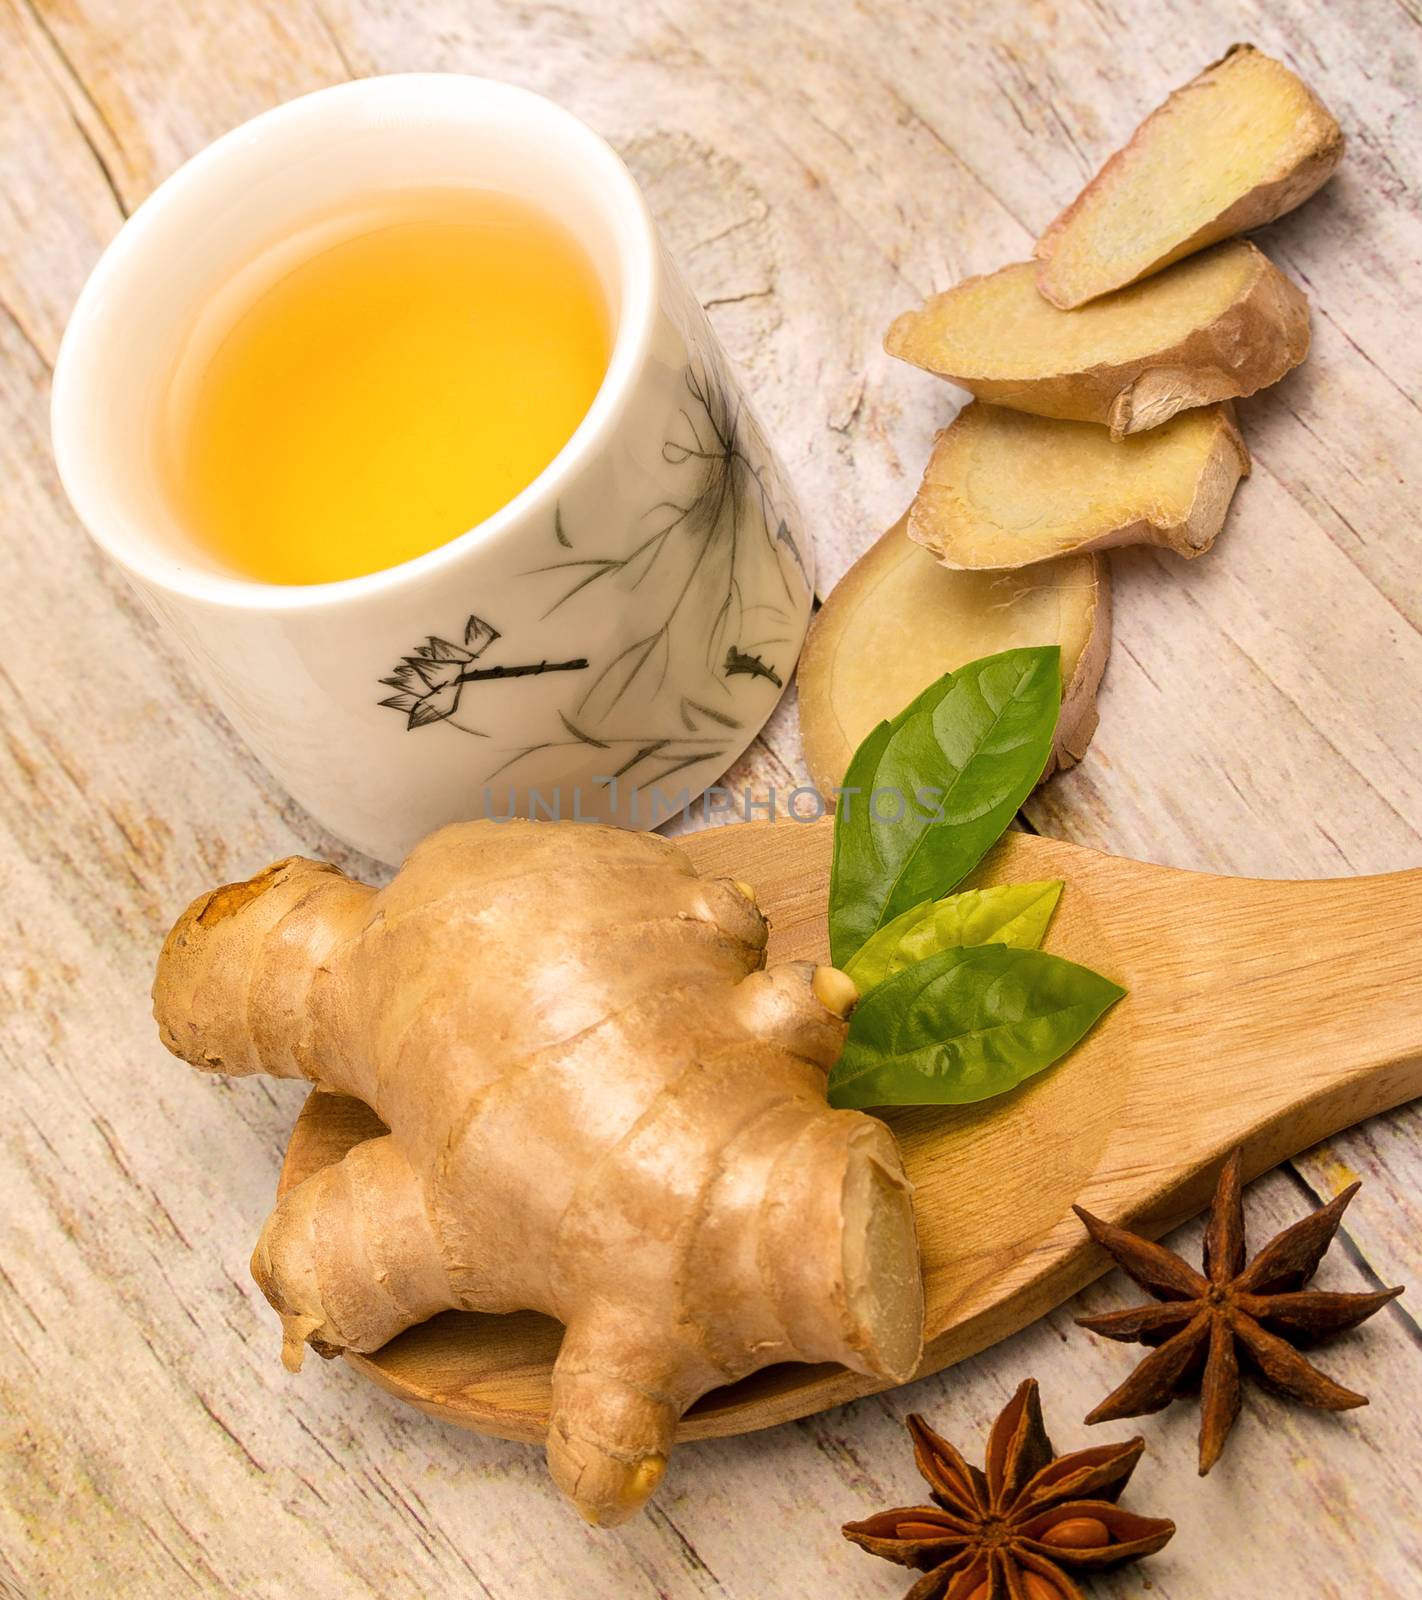 Japanese Ginger Tea Shows Natural Spice And Refreshed  by stuartmiles